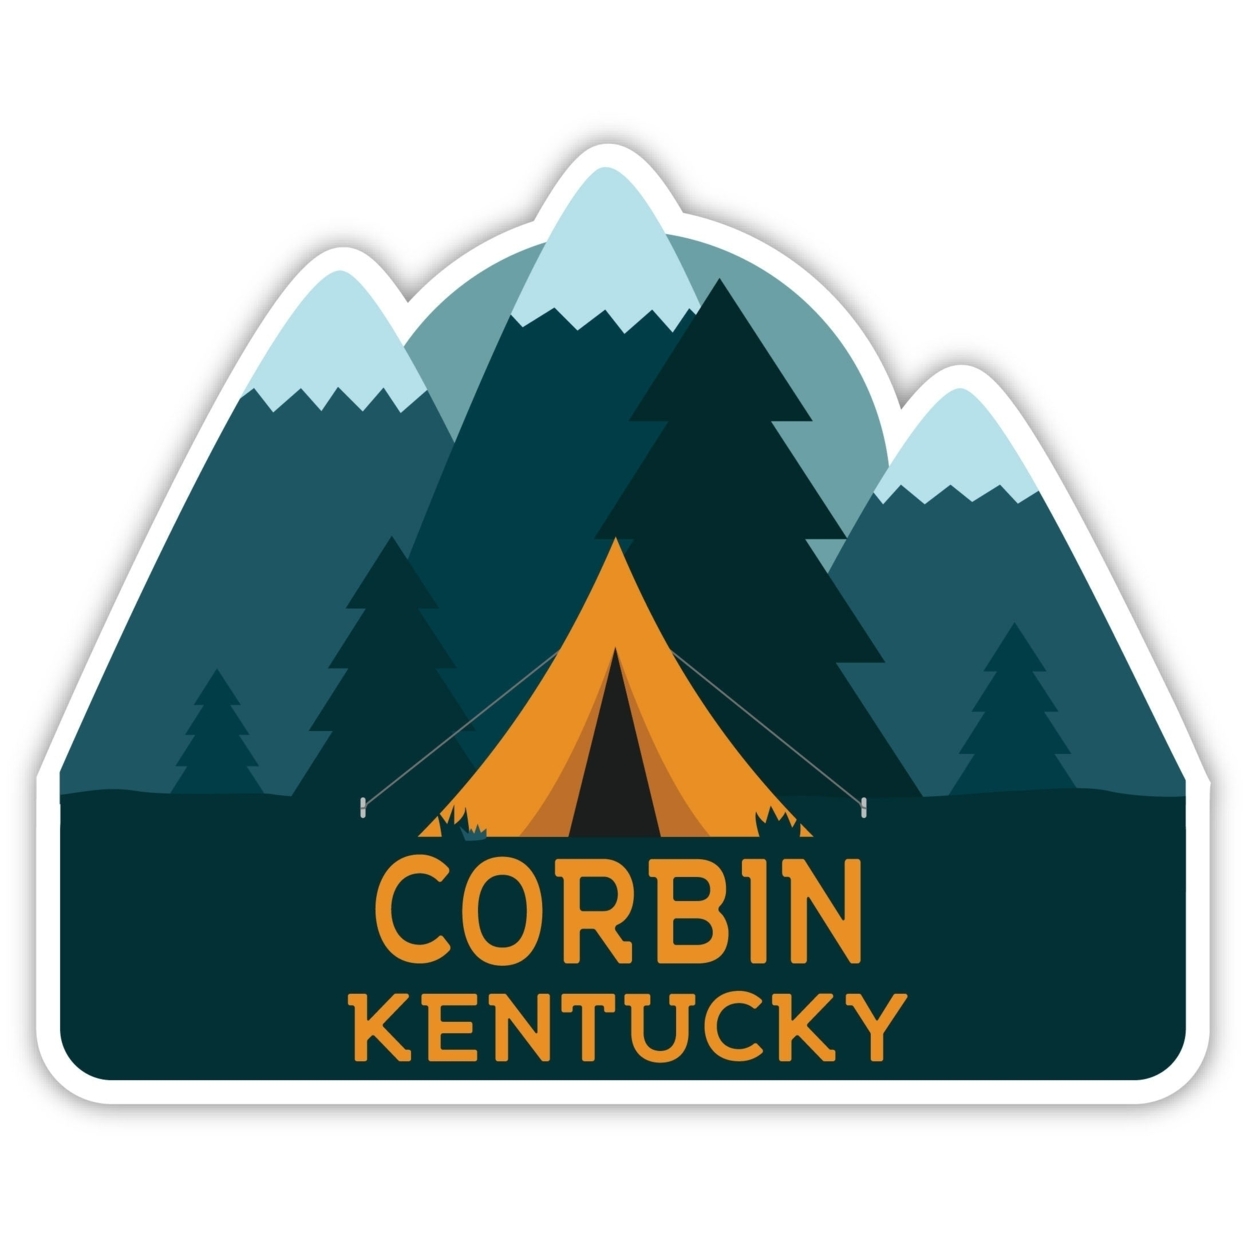 Corbin Kentucky Souvenir Decorative Stickers (Choose Theme And Size) - 4-Pack, 2-Inch, Tent